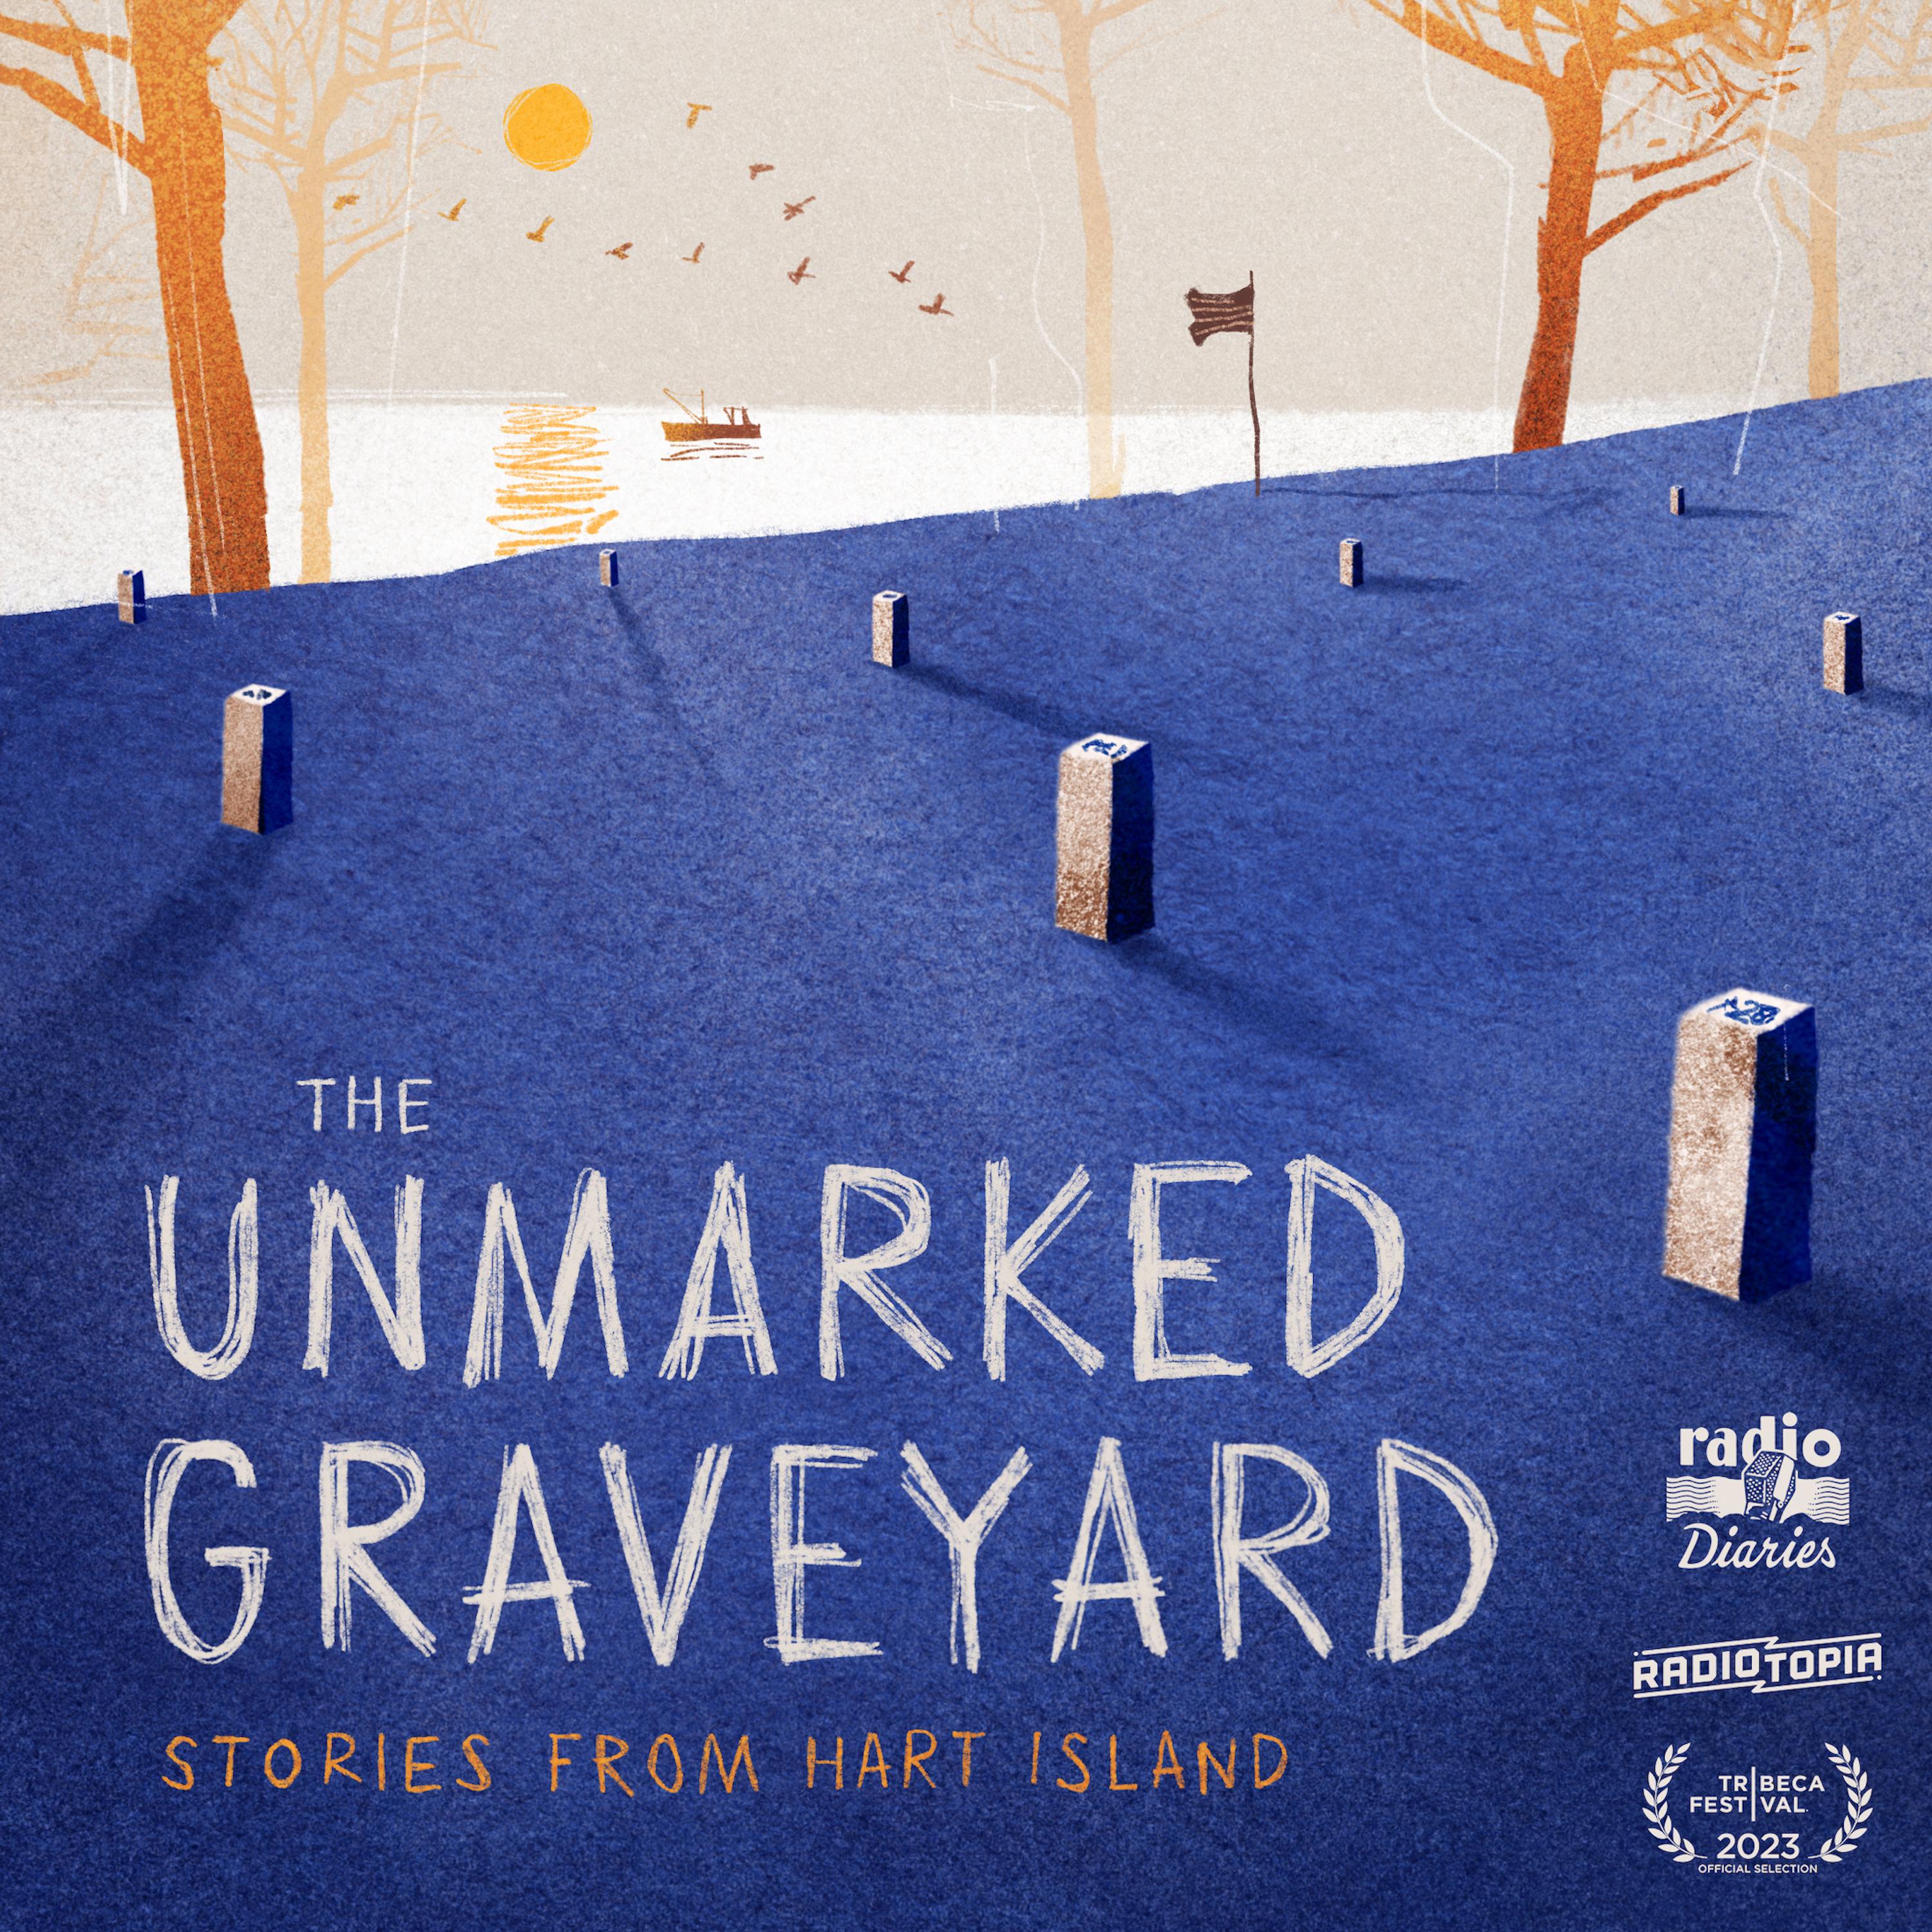 Thumbnail for "The Unmarked Graveyard: Stories from Hart Island".